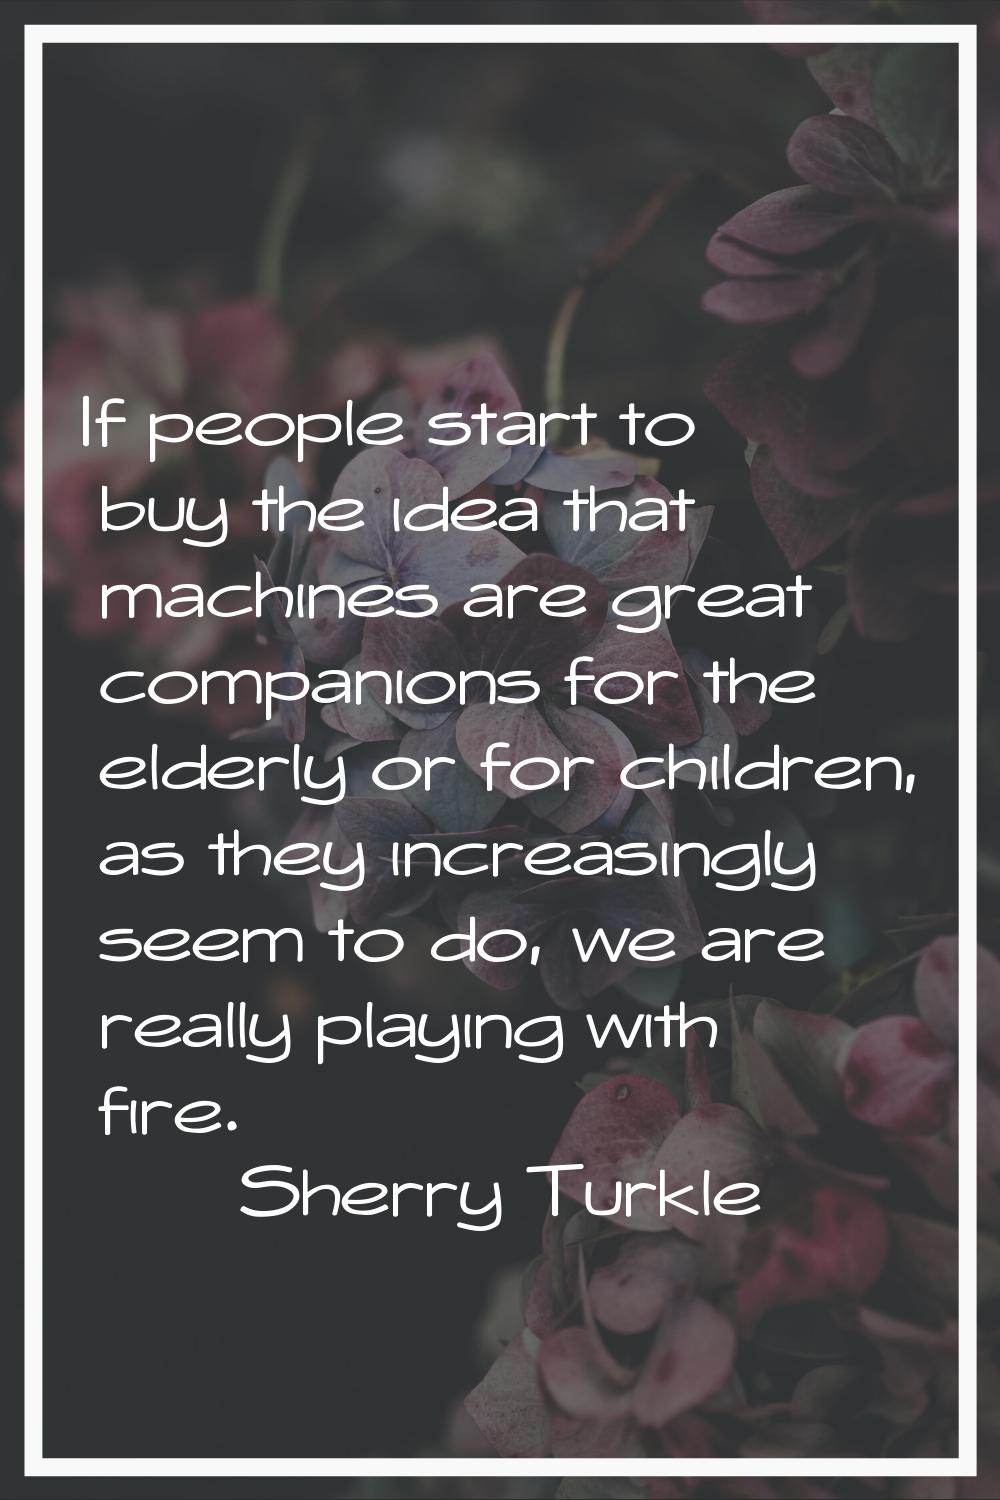 If people start to buy the idea that machines are great companions for the elderly or for children,